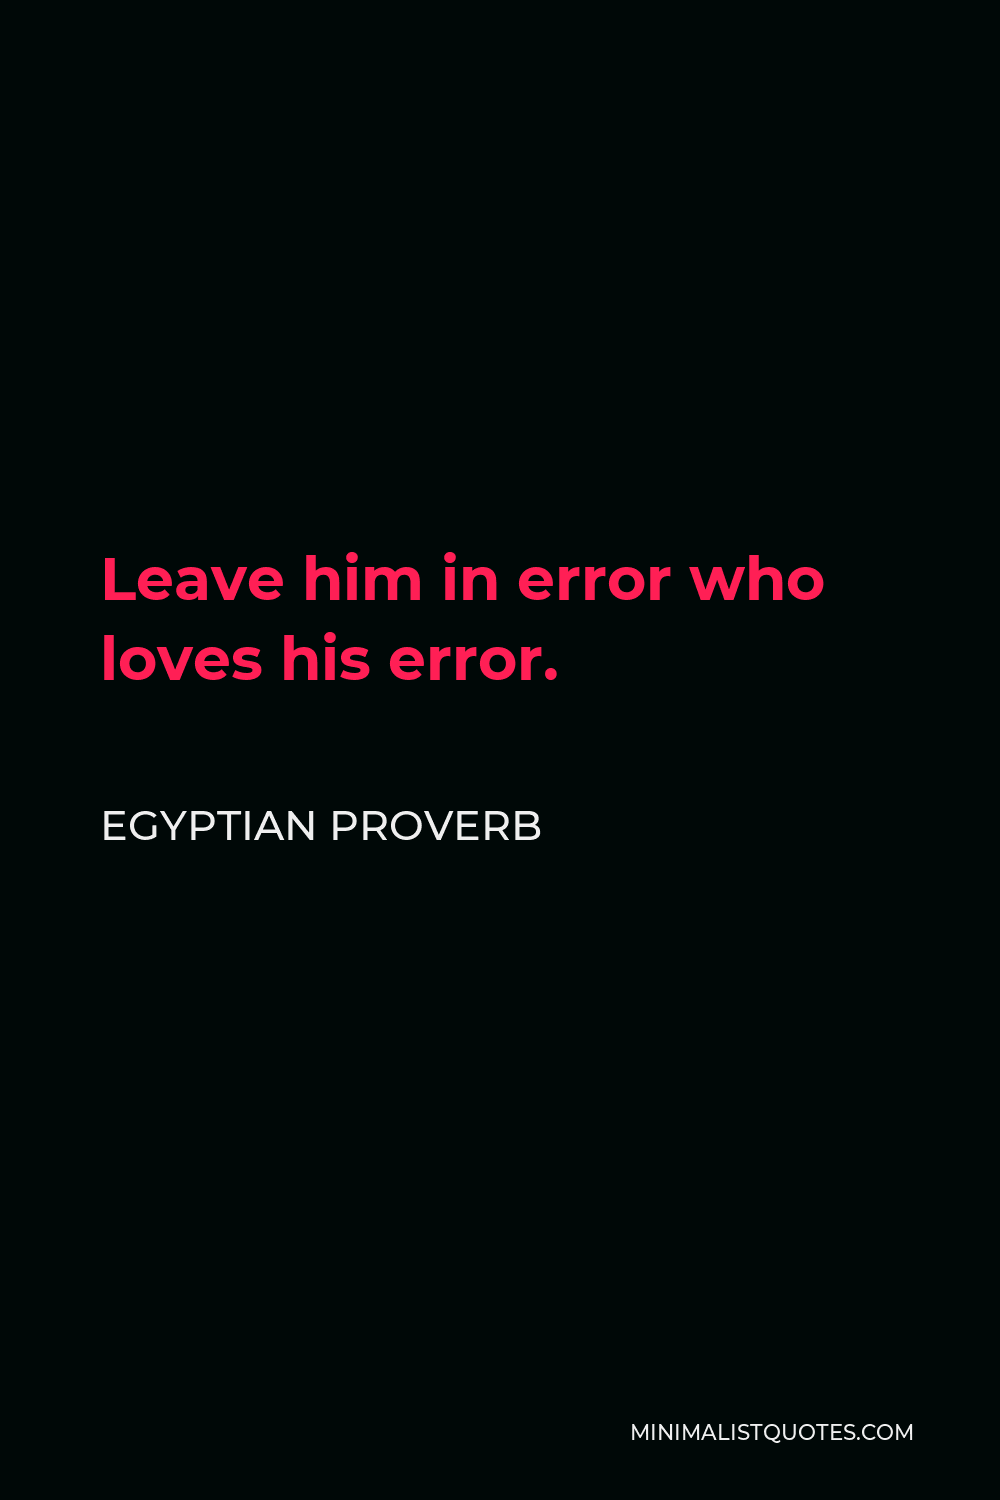 Egyptian Proverb Quote - Leave him in error who loves his error.